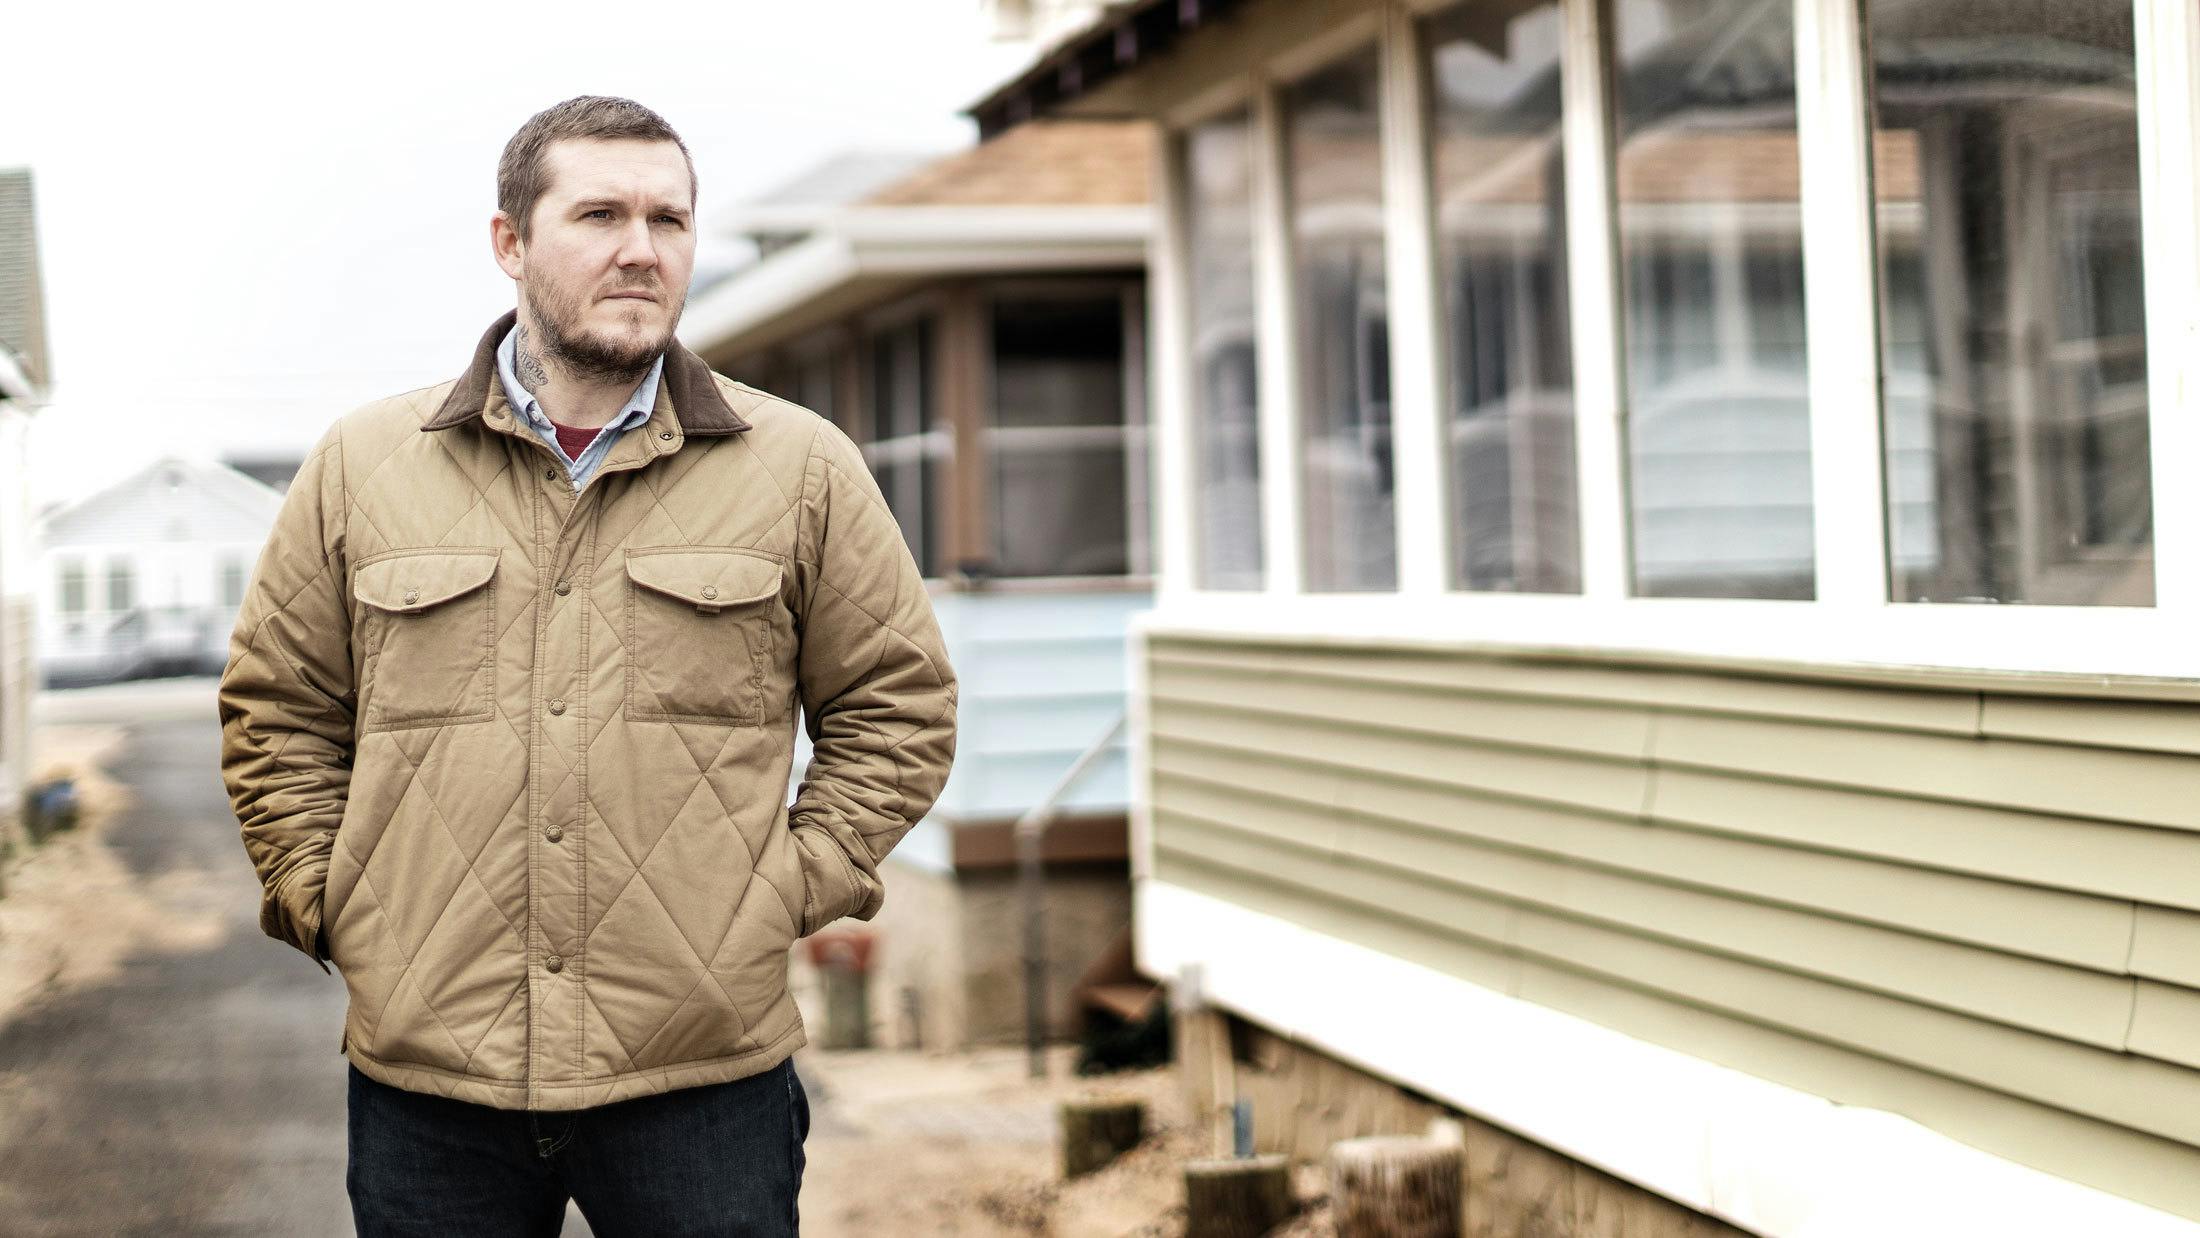 Brian Fallon: The songs that changed my life